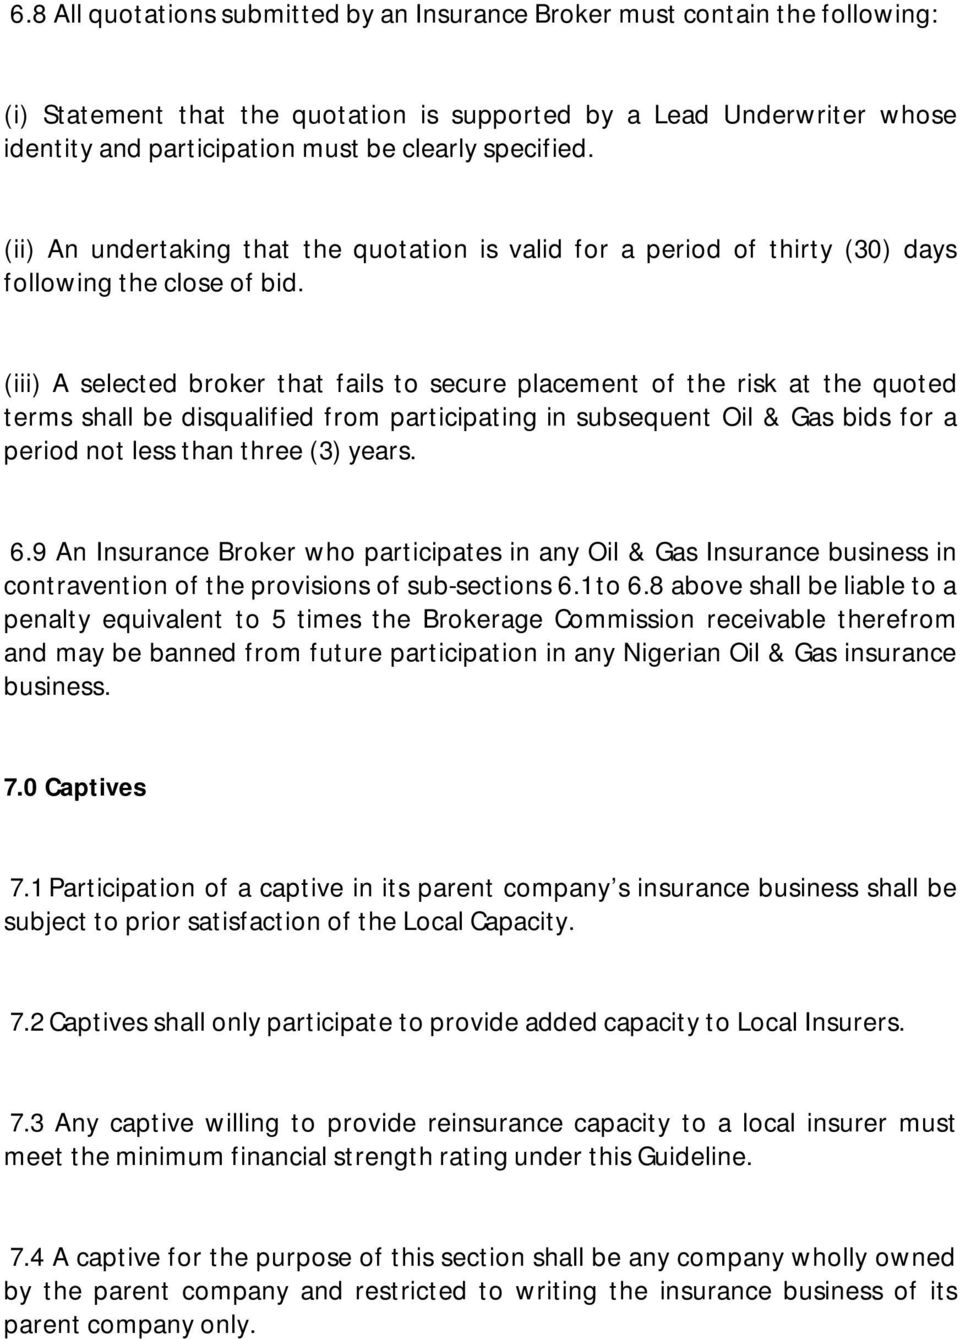 (iii) A selected broker that fails to secure placement of the risk at the quoted terms shall be disqualified from participating in subsequent Oil & Gas bids for a period not less than three (3) years.